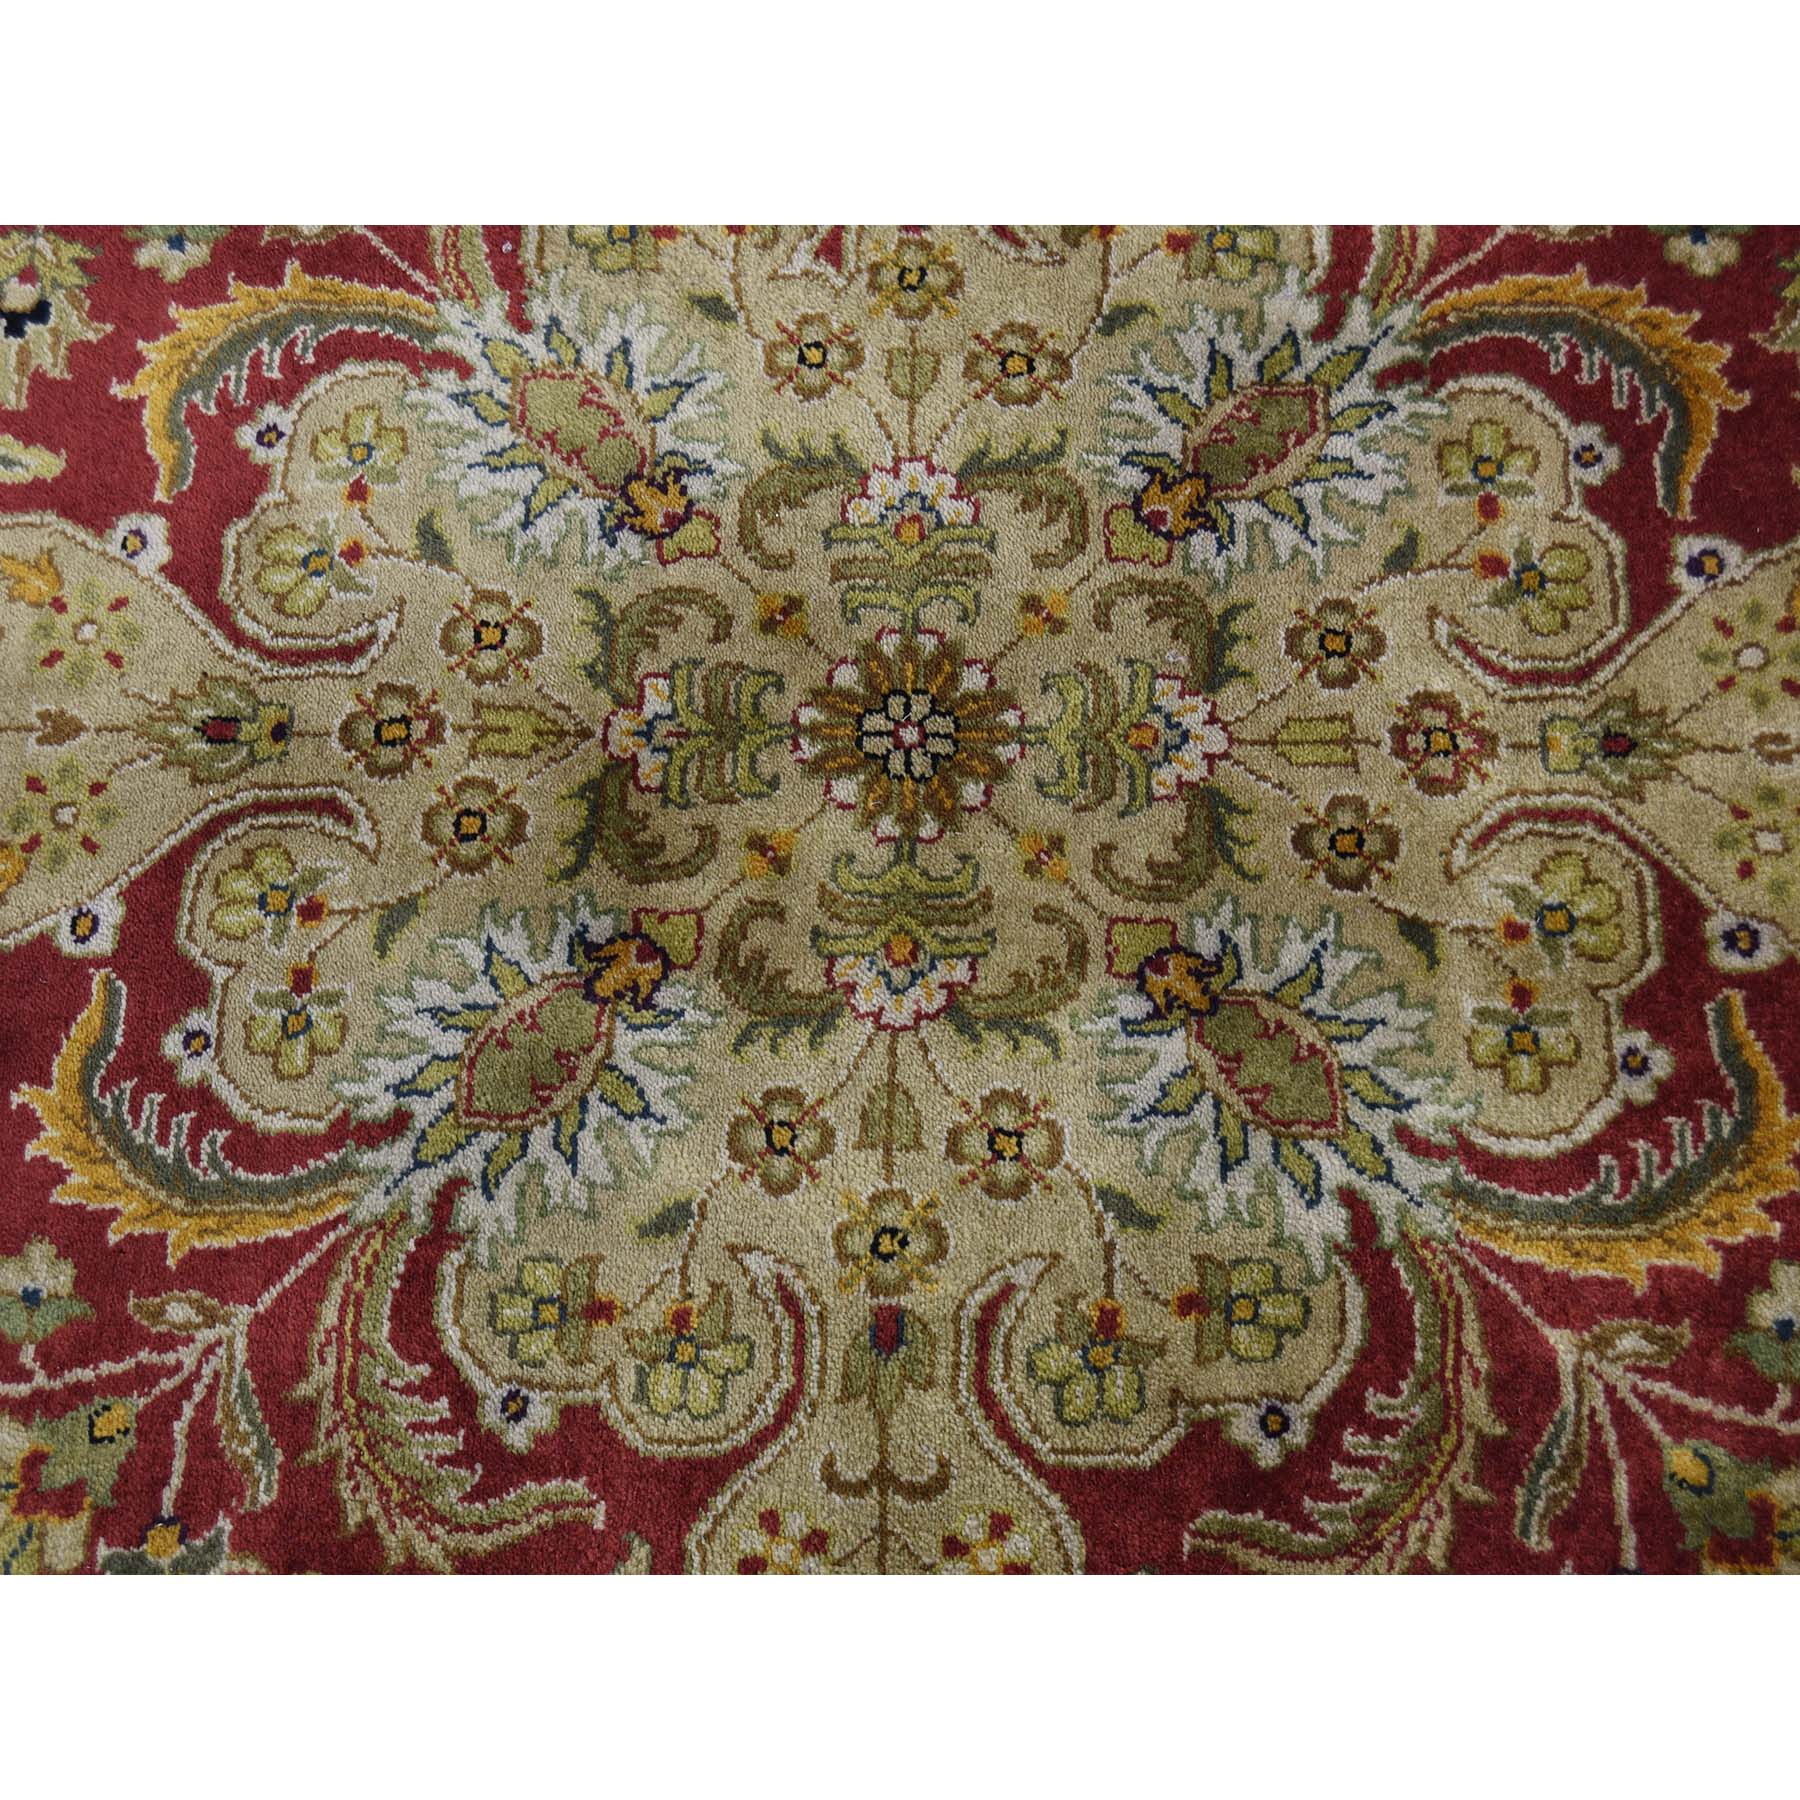 8-x8- New Zealand Wool 300 Kpsi Kashan Revival Round Hand-Knotted Oriental Rug 